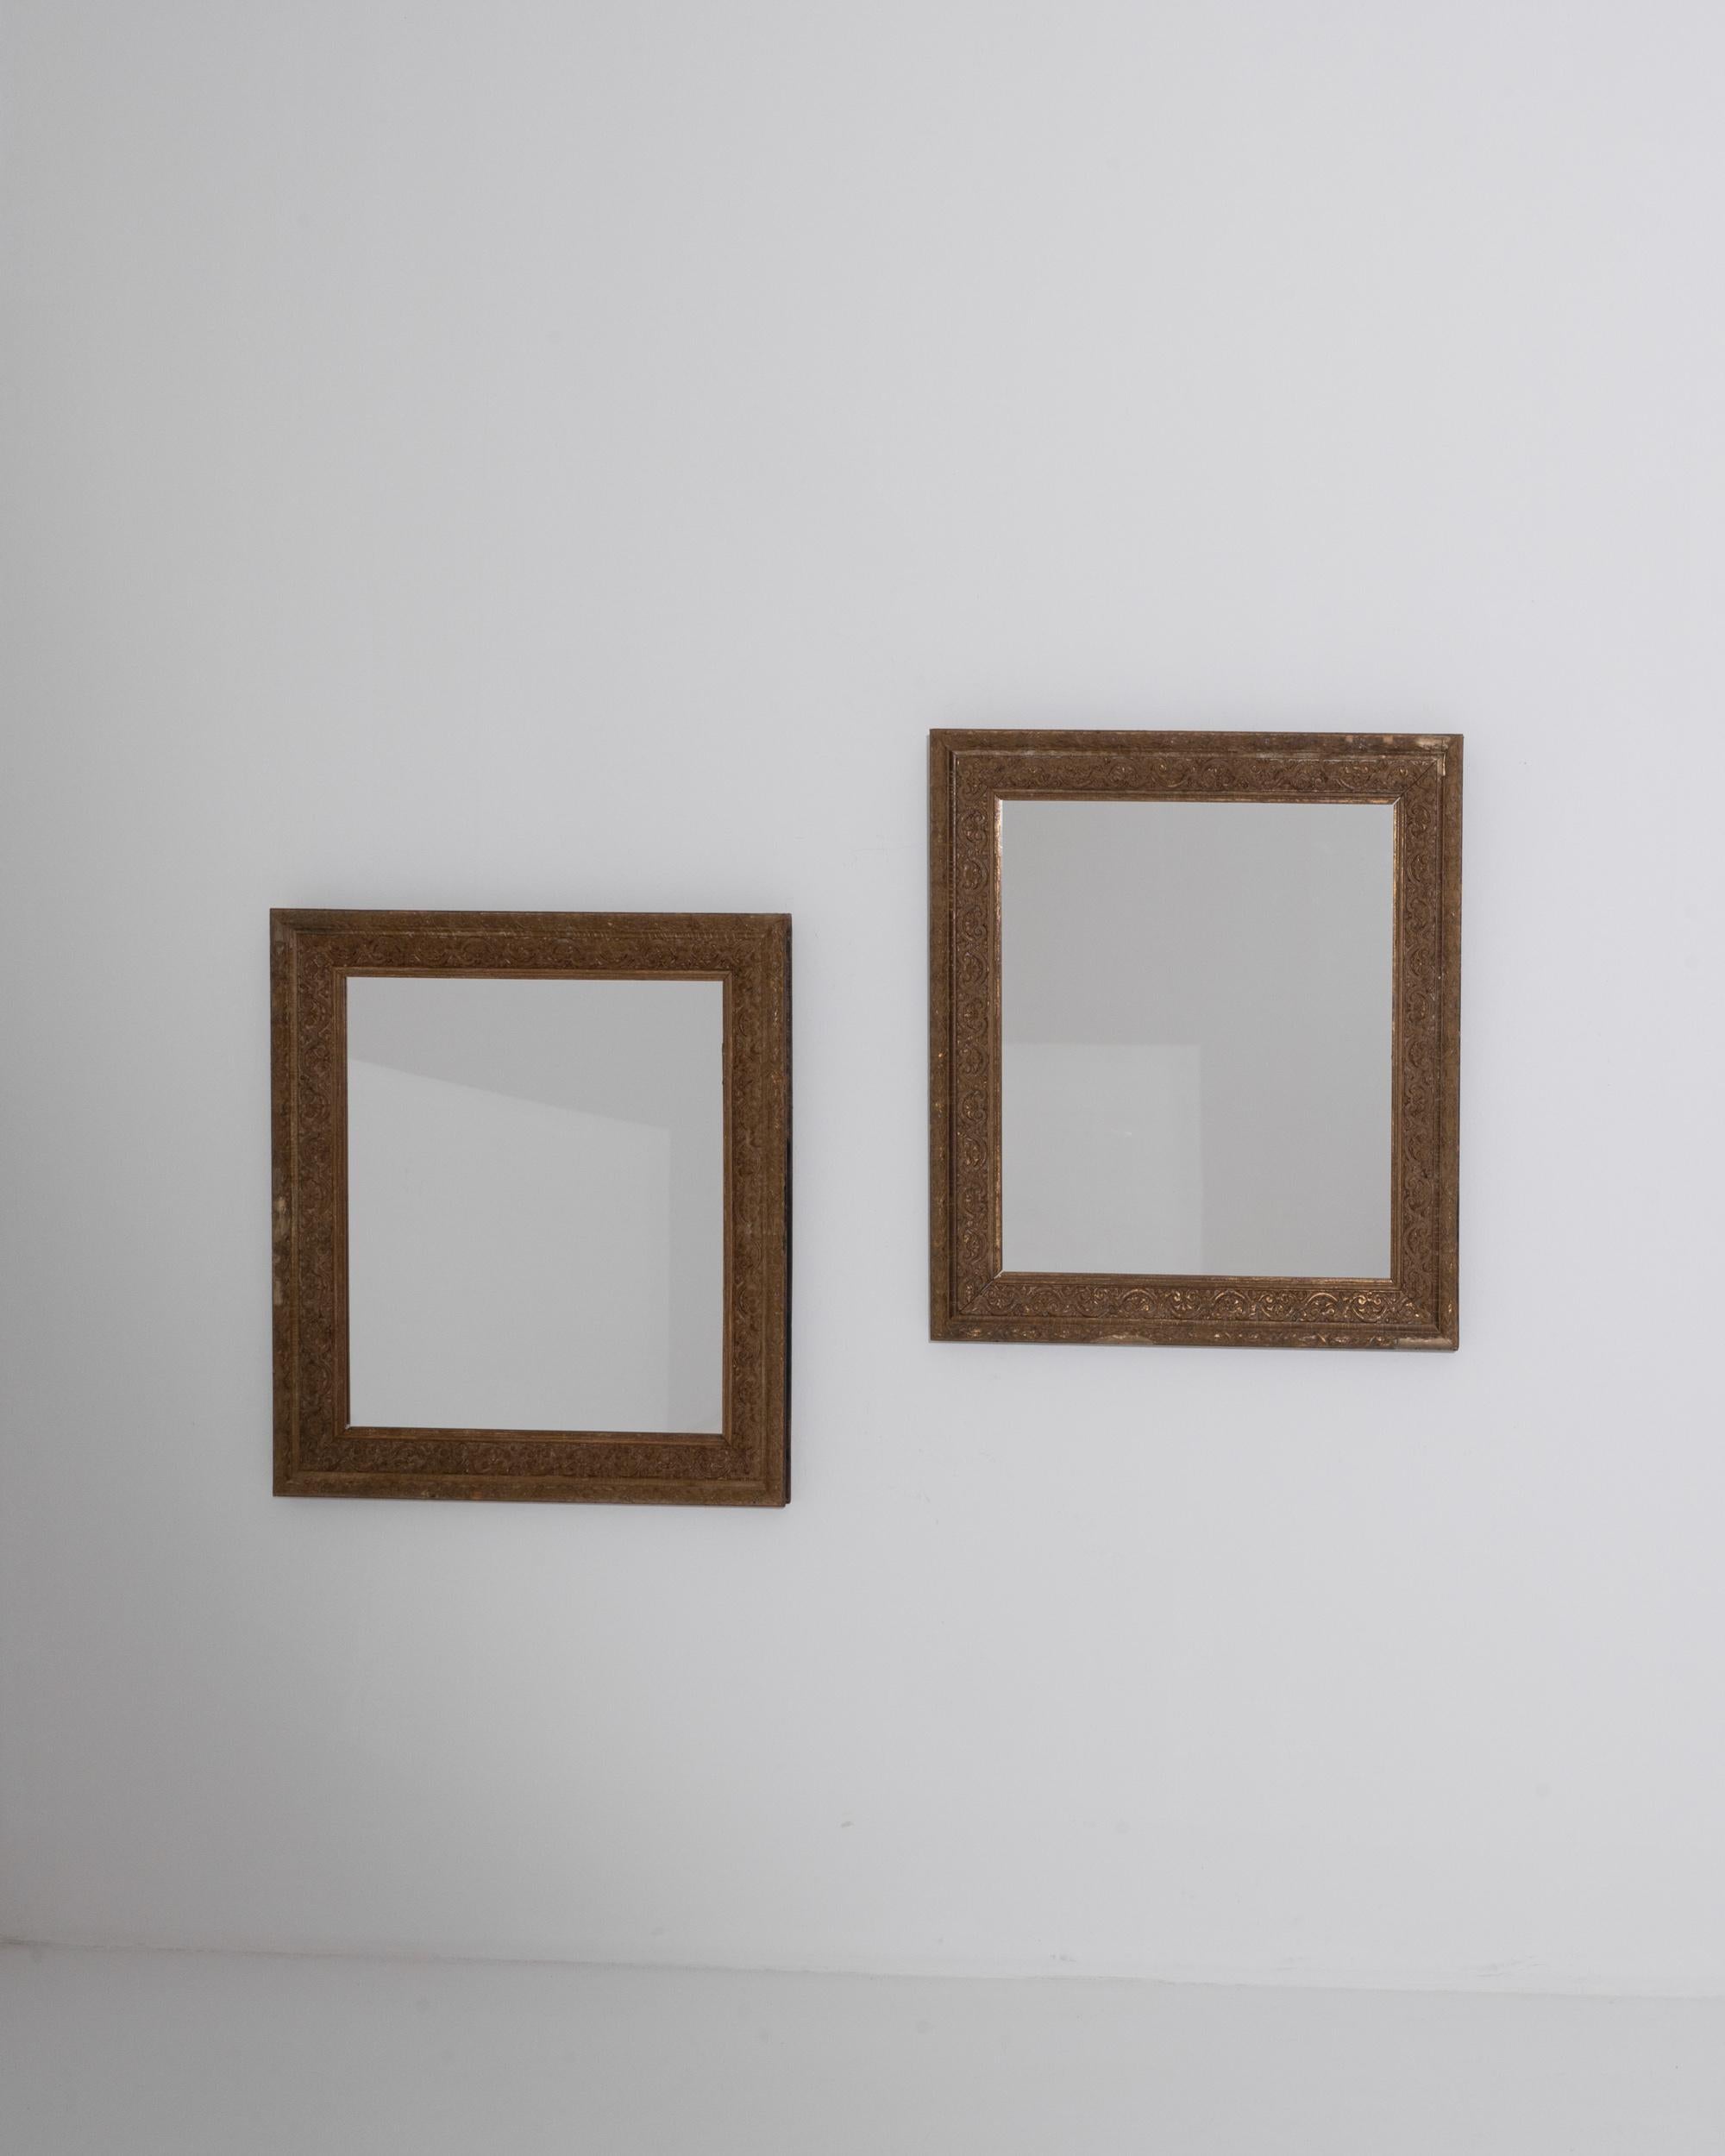 A pair of gilded wooden mirrors made in 19th century France. This pair of deceptively simple mirrors reveal a network of bustling details upon further inspection. A foliated scroll pattern wraps the border of the frames, a time-worn patina